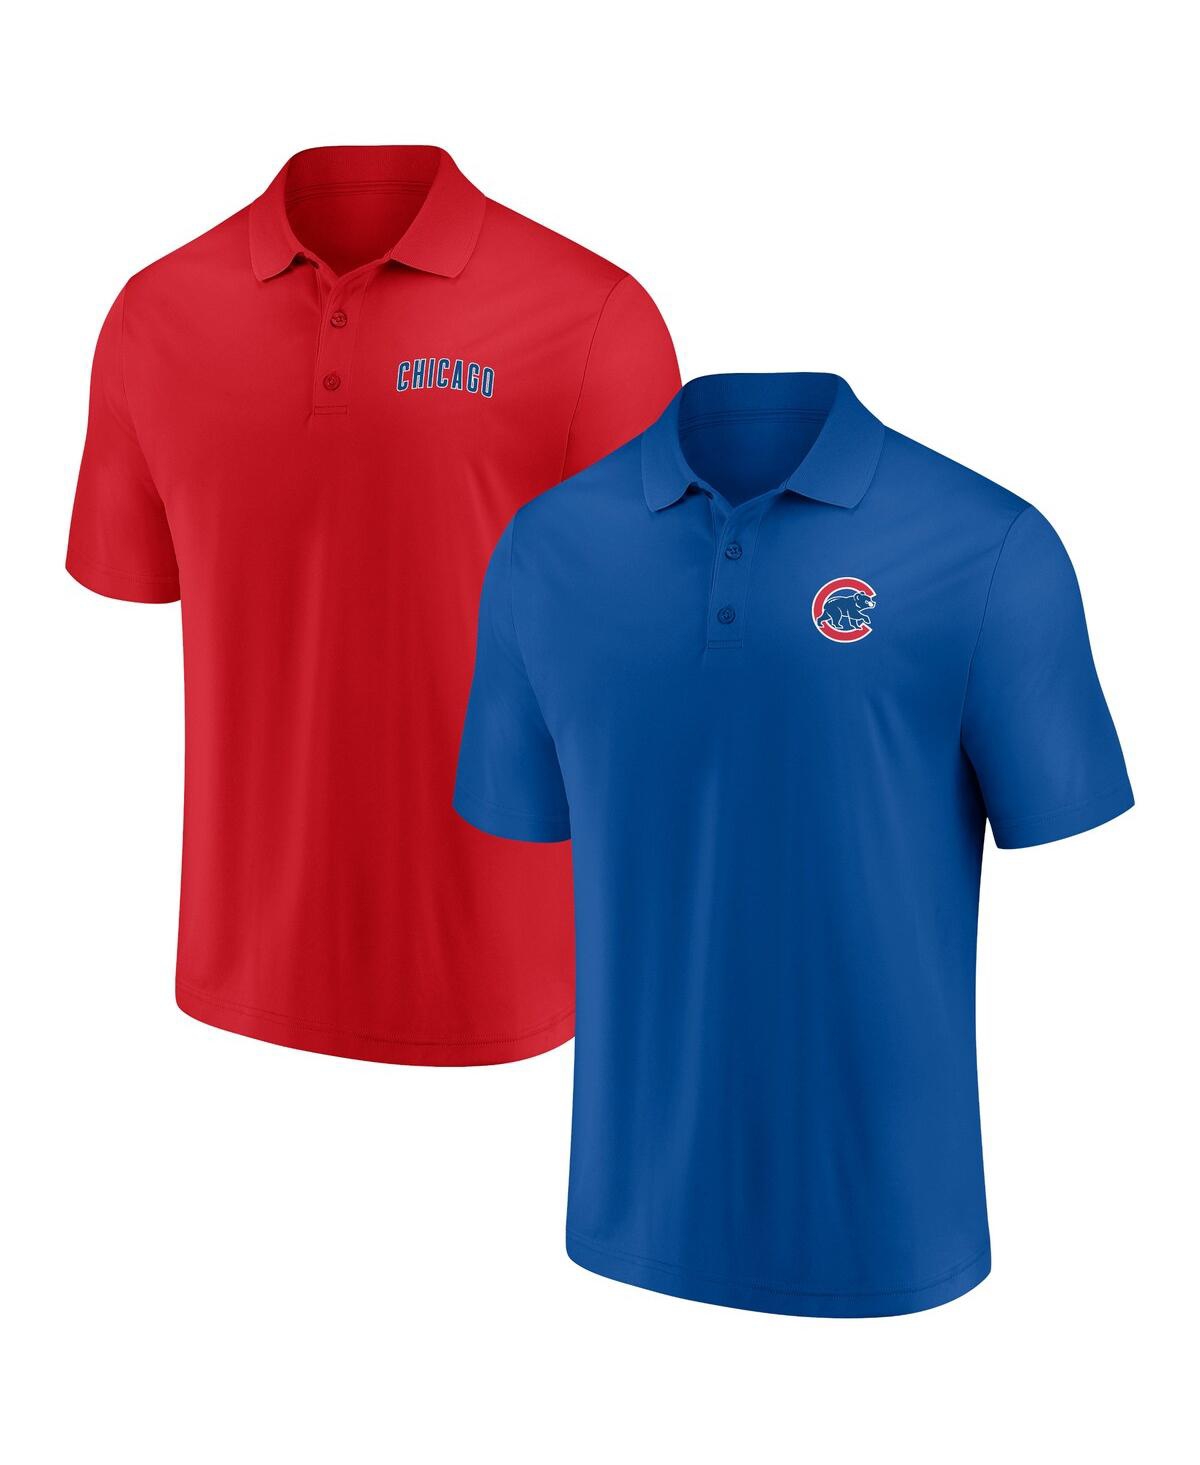 Fanatics Men's  Royal, Red Chicago Cubs Dueling Logos Polo Shirt Combo Set In Royal,red